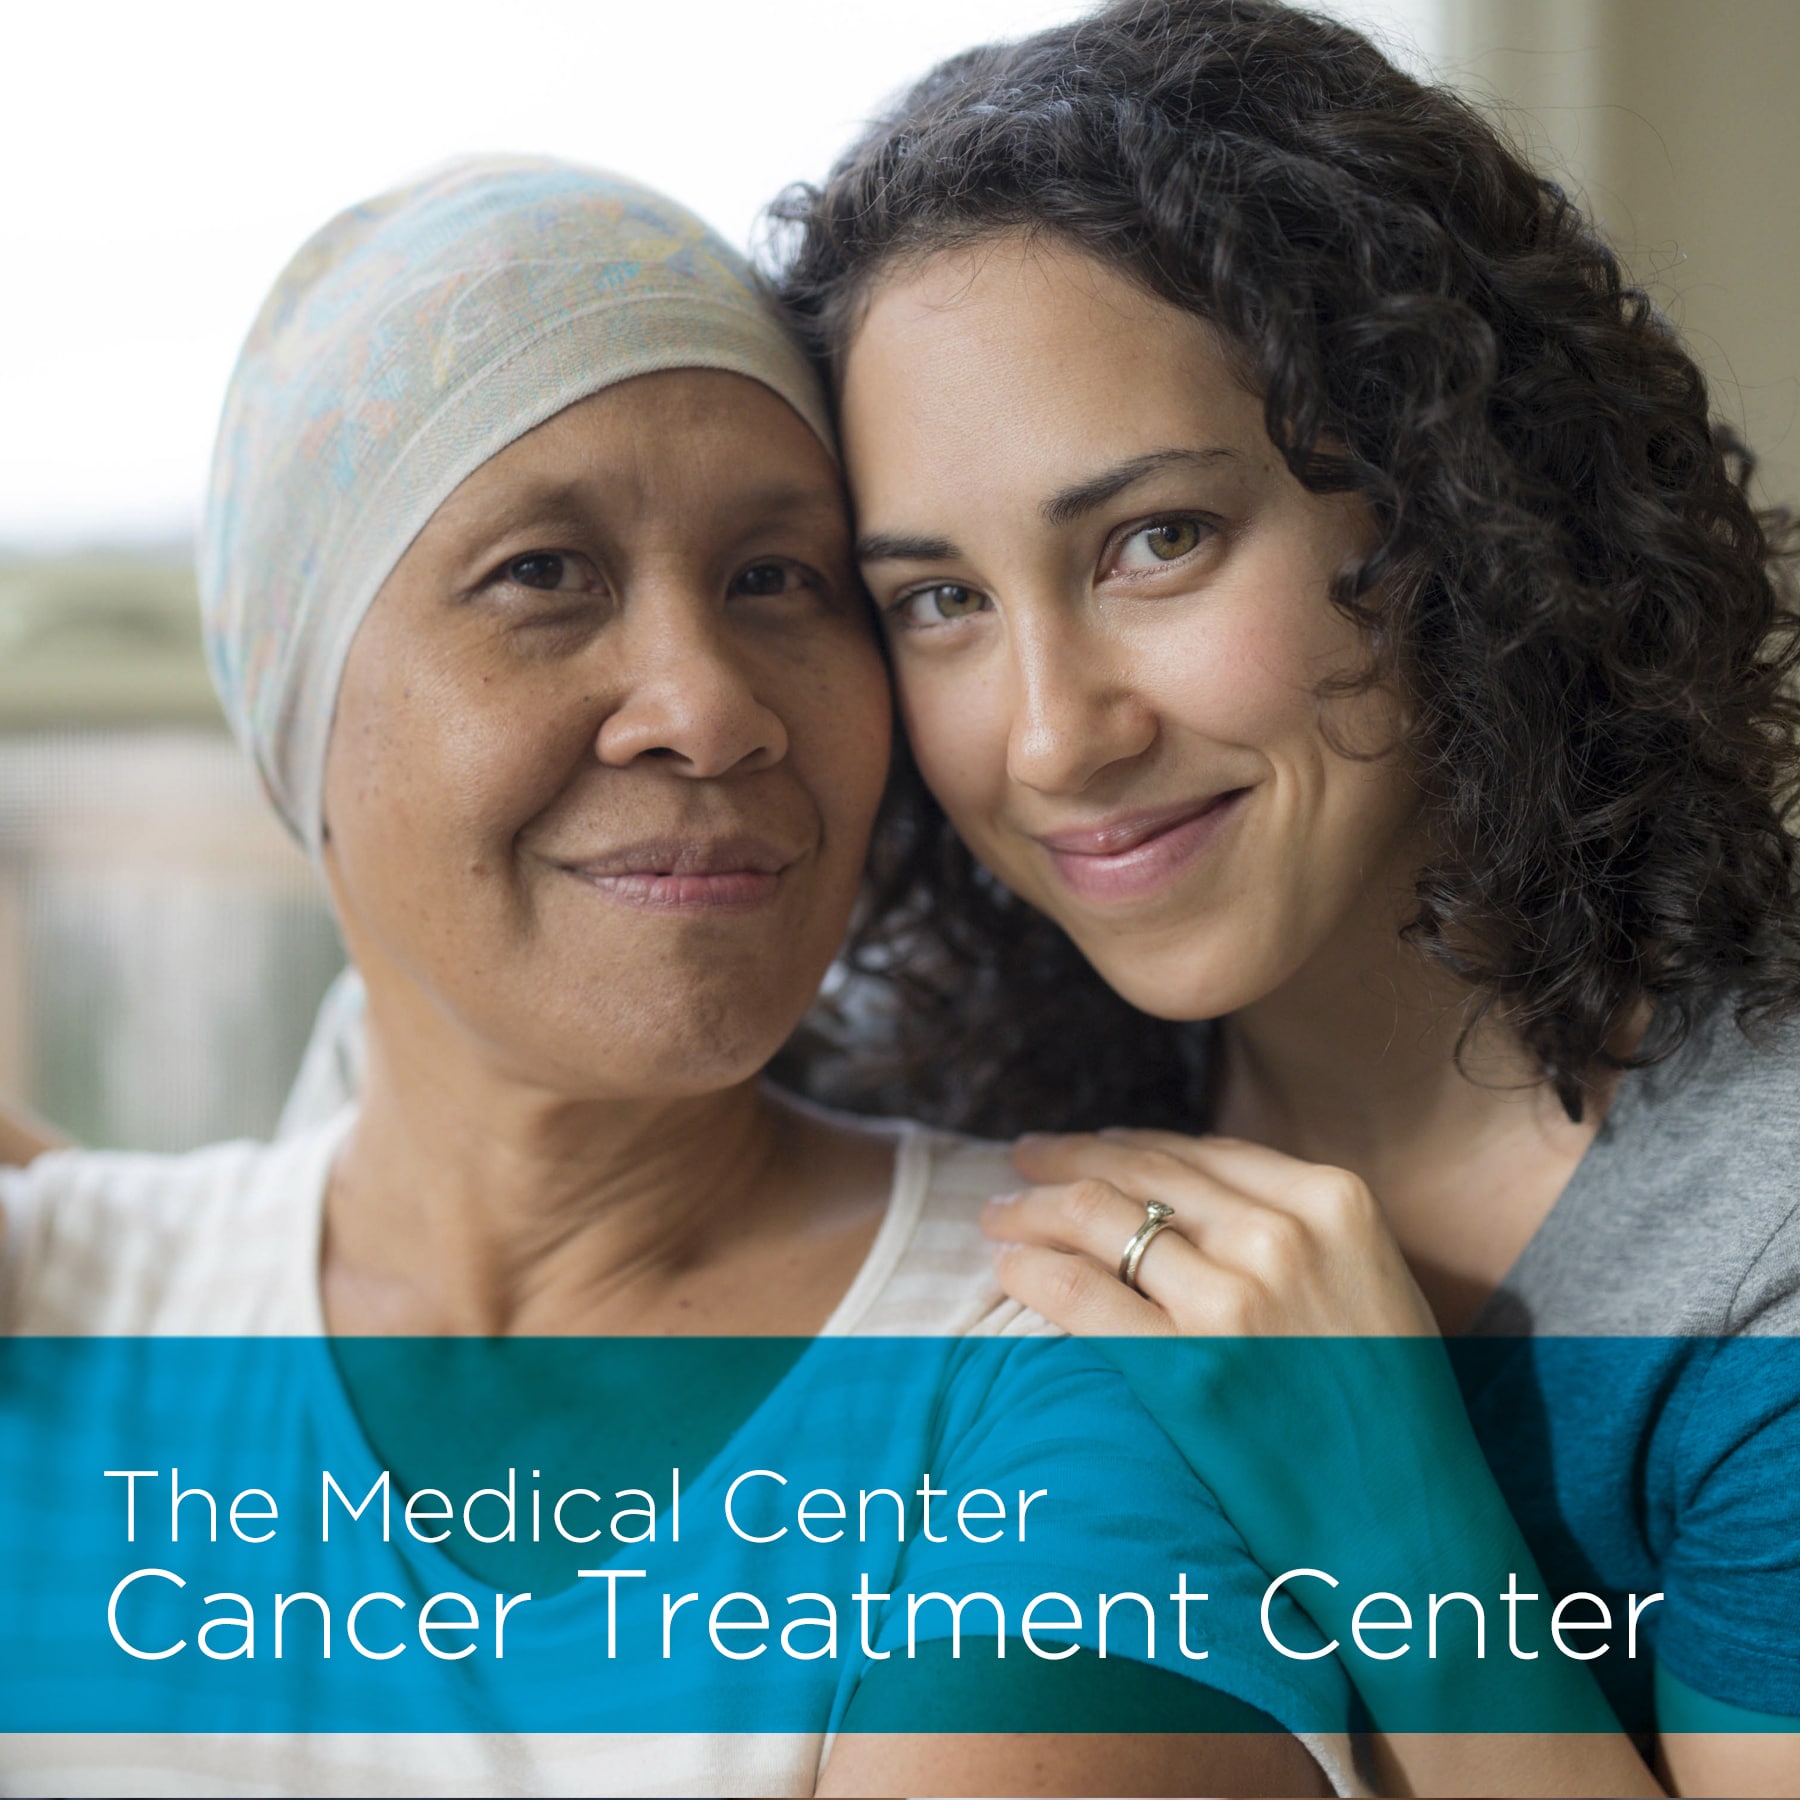 The Medical Center Cancer Treatment Center featured image